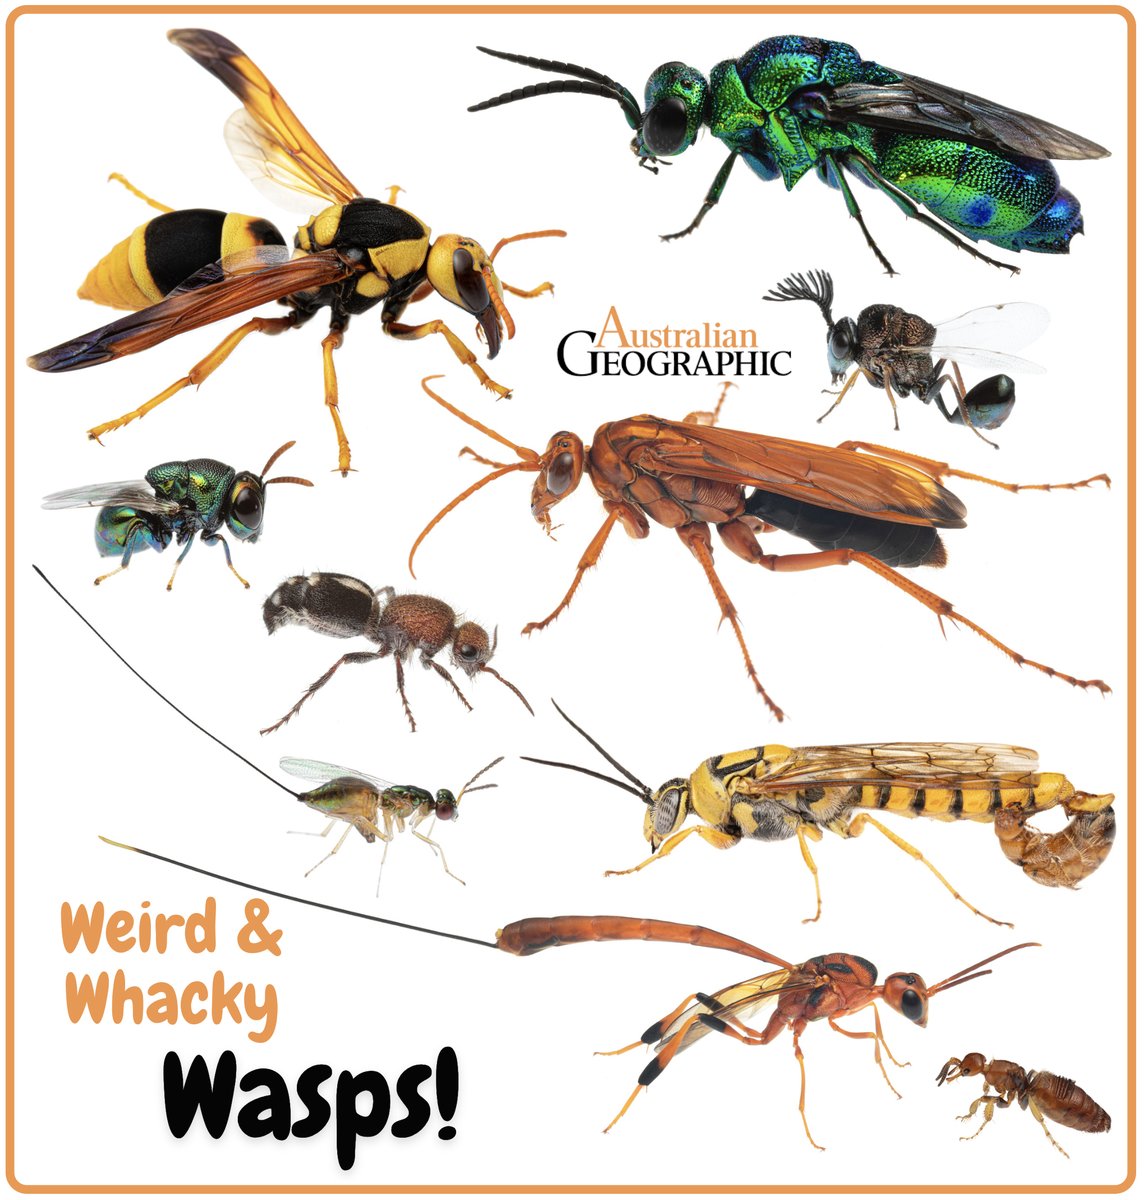 New @ausgeo article out! 🚨 The World of Weird & Whacky Wasps! 🐝 Australia is full of incredible wasps with bizarre life-cycles happening right now in your own backyard! 🤯 Check out the article I wrote here to learn more! - ausgeo.co/wasps